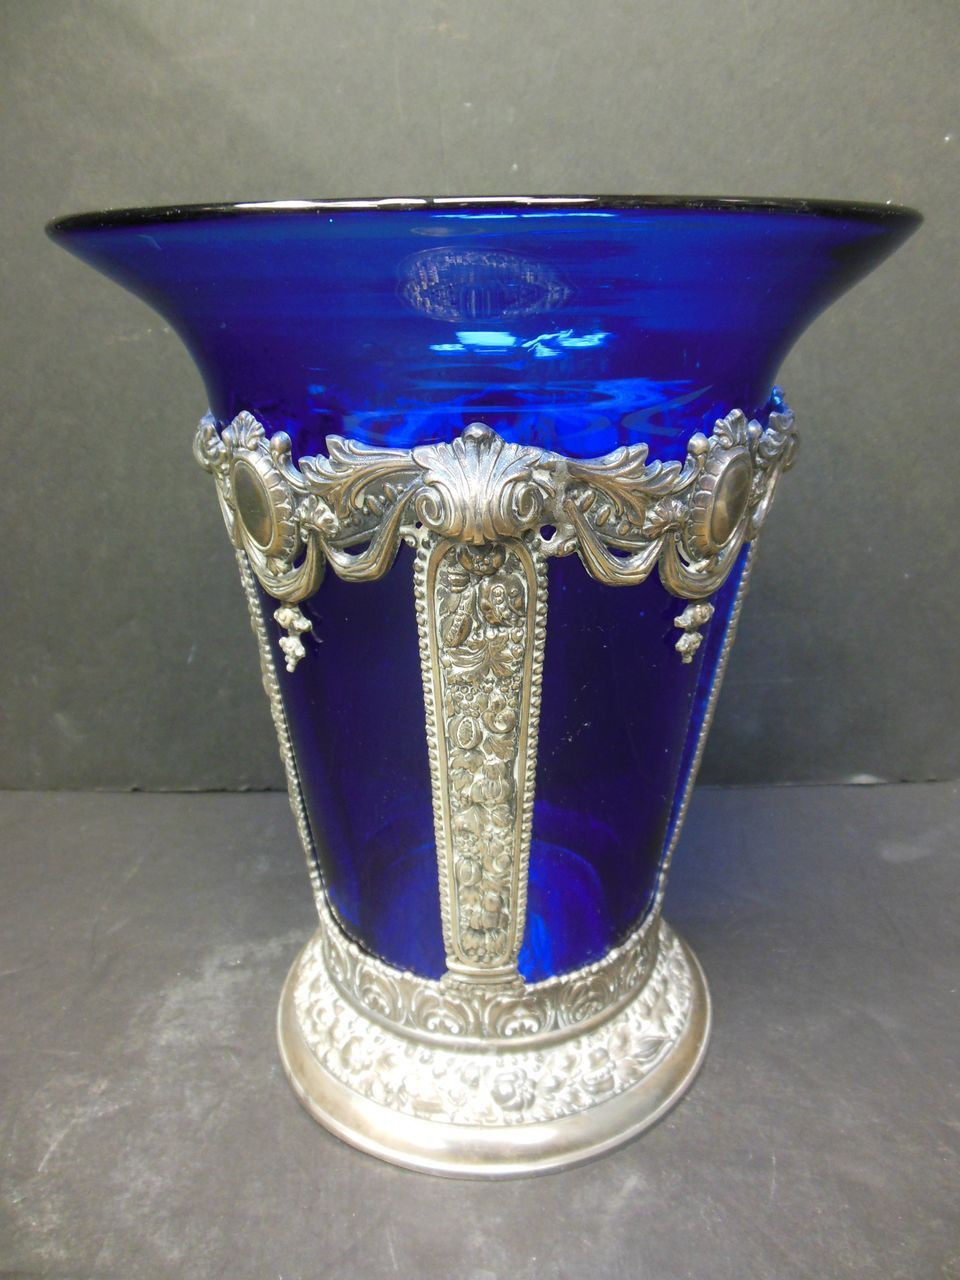 21 Great Red and Yellow Glass Vase 2022 free download red and yellow glass vase of light blue glass vase pictures bunch od red and yellow tulips with in light blue glass vase images victorian blue glass vase with silver plated holder of light b